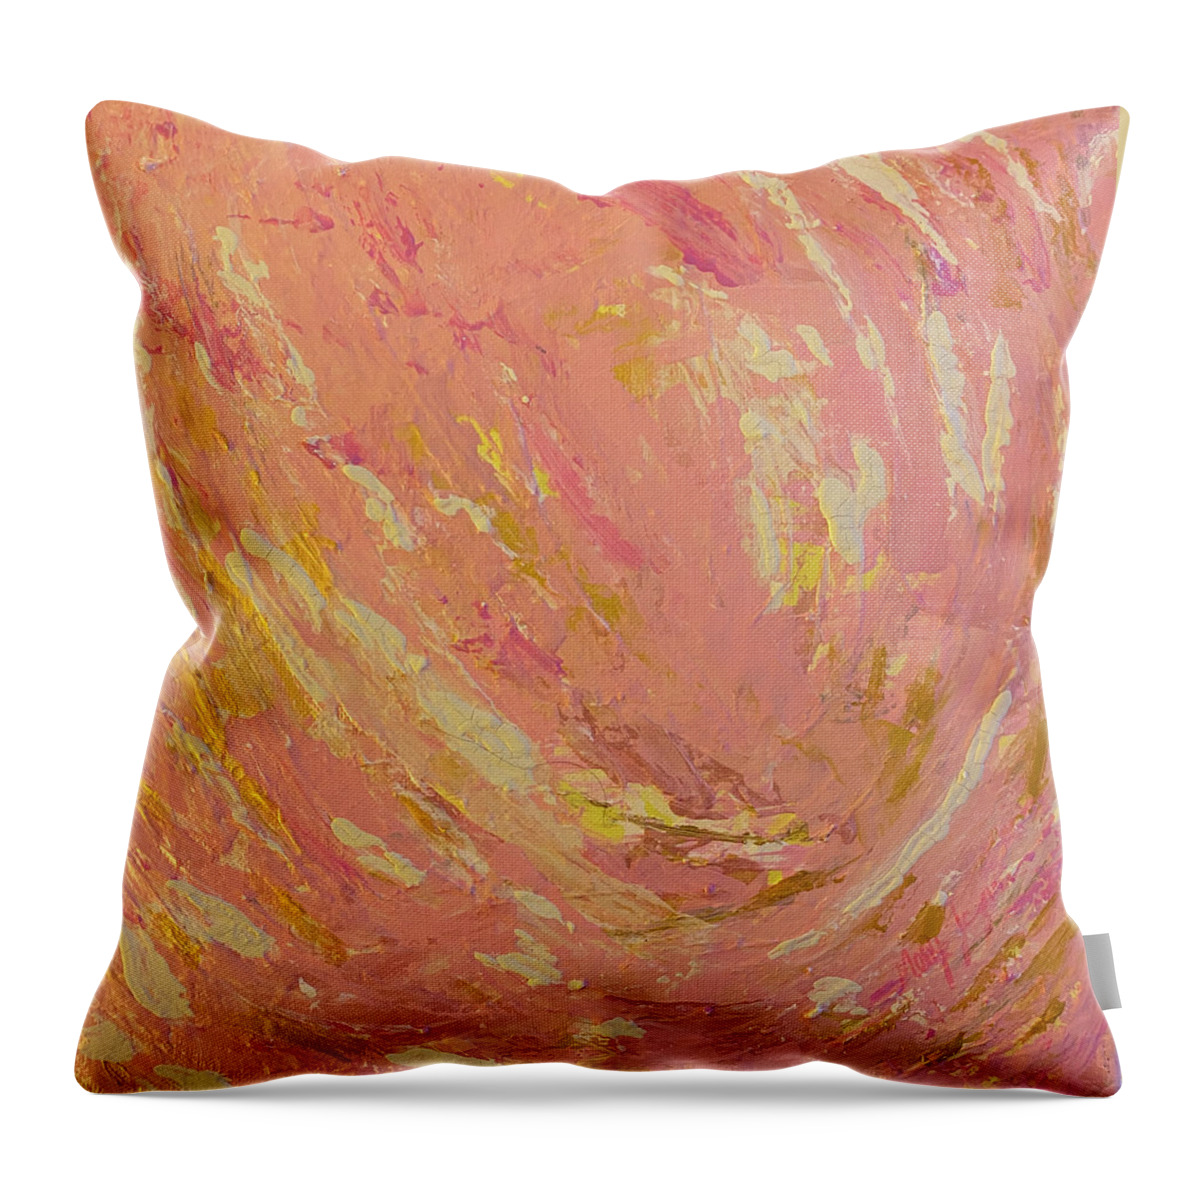 Pink Throw Pillow featuring the painting Sunset by Medge Jaspan